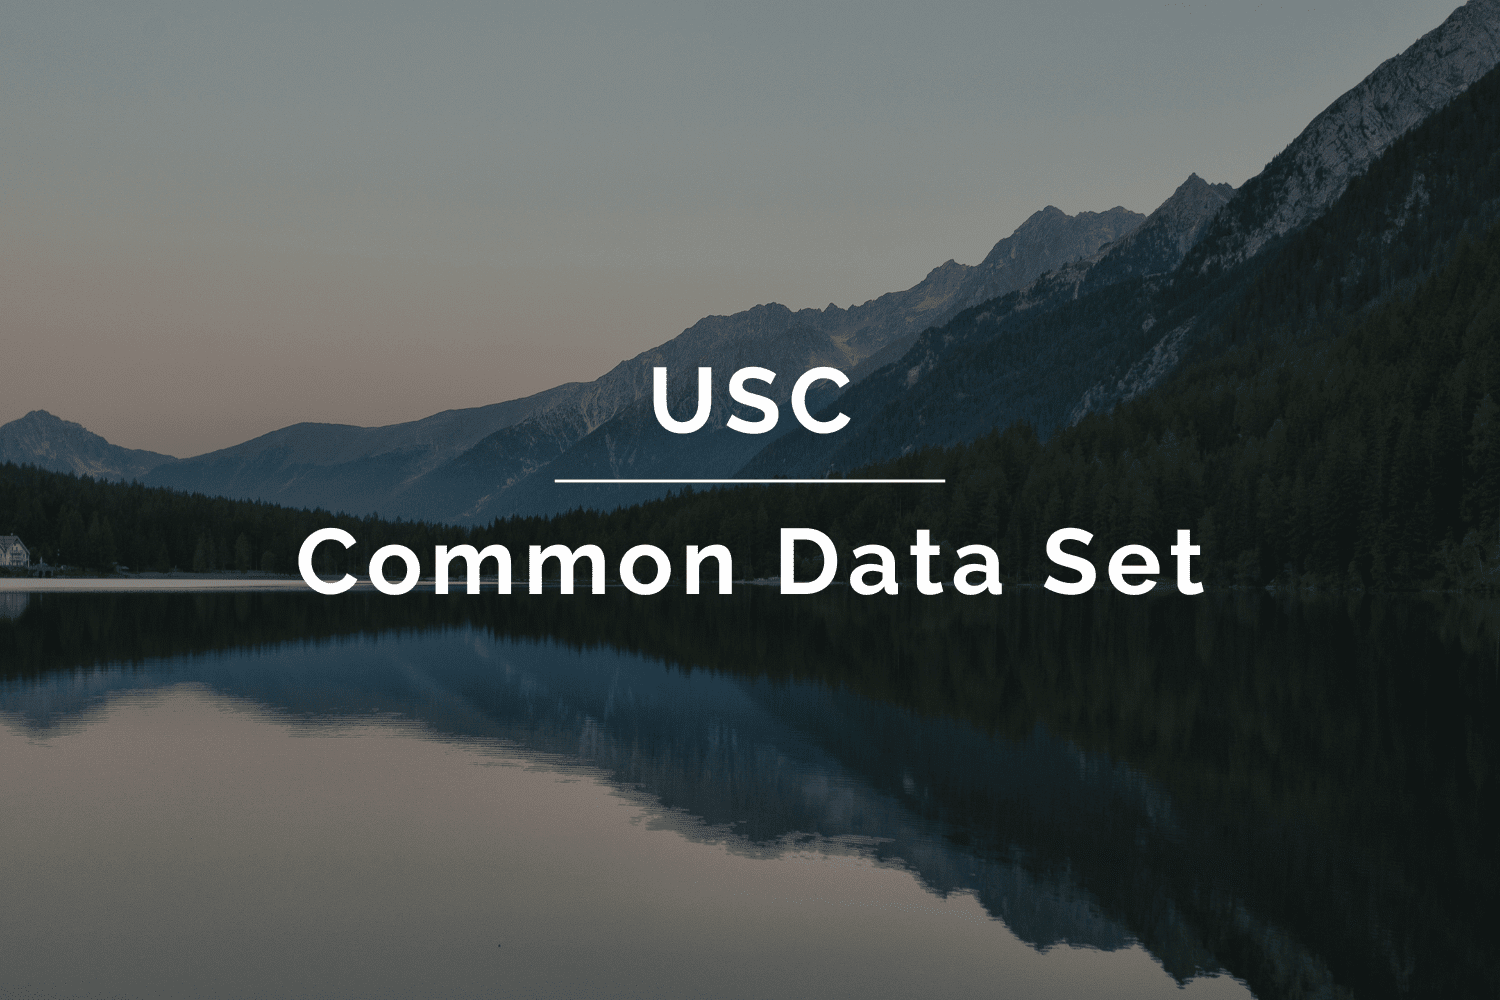 How to Use the USC Common Data Set